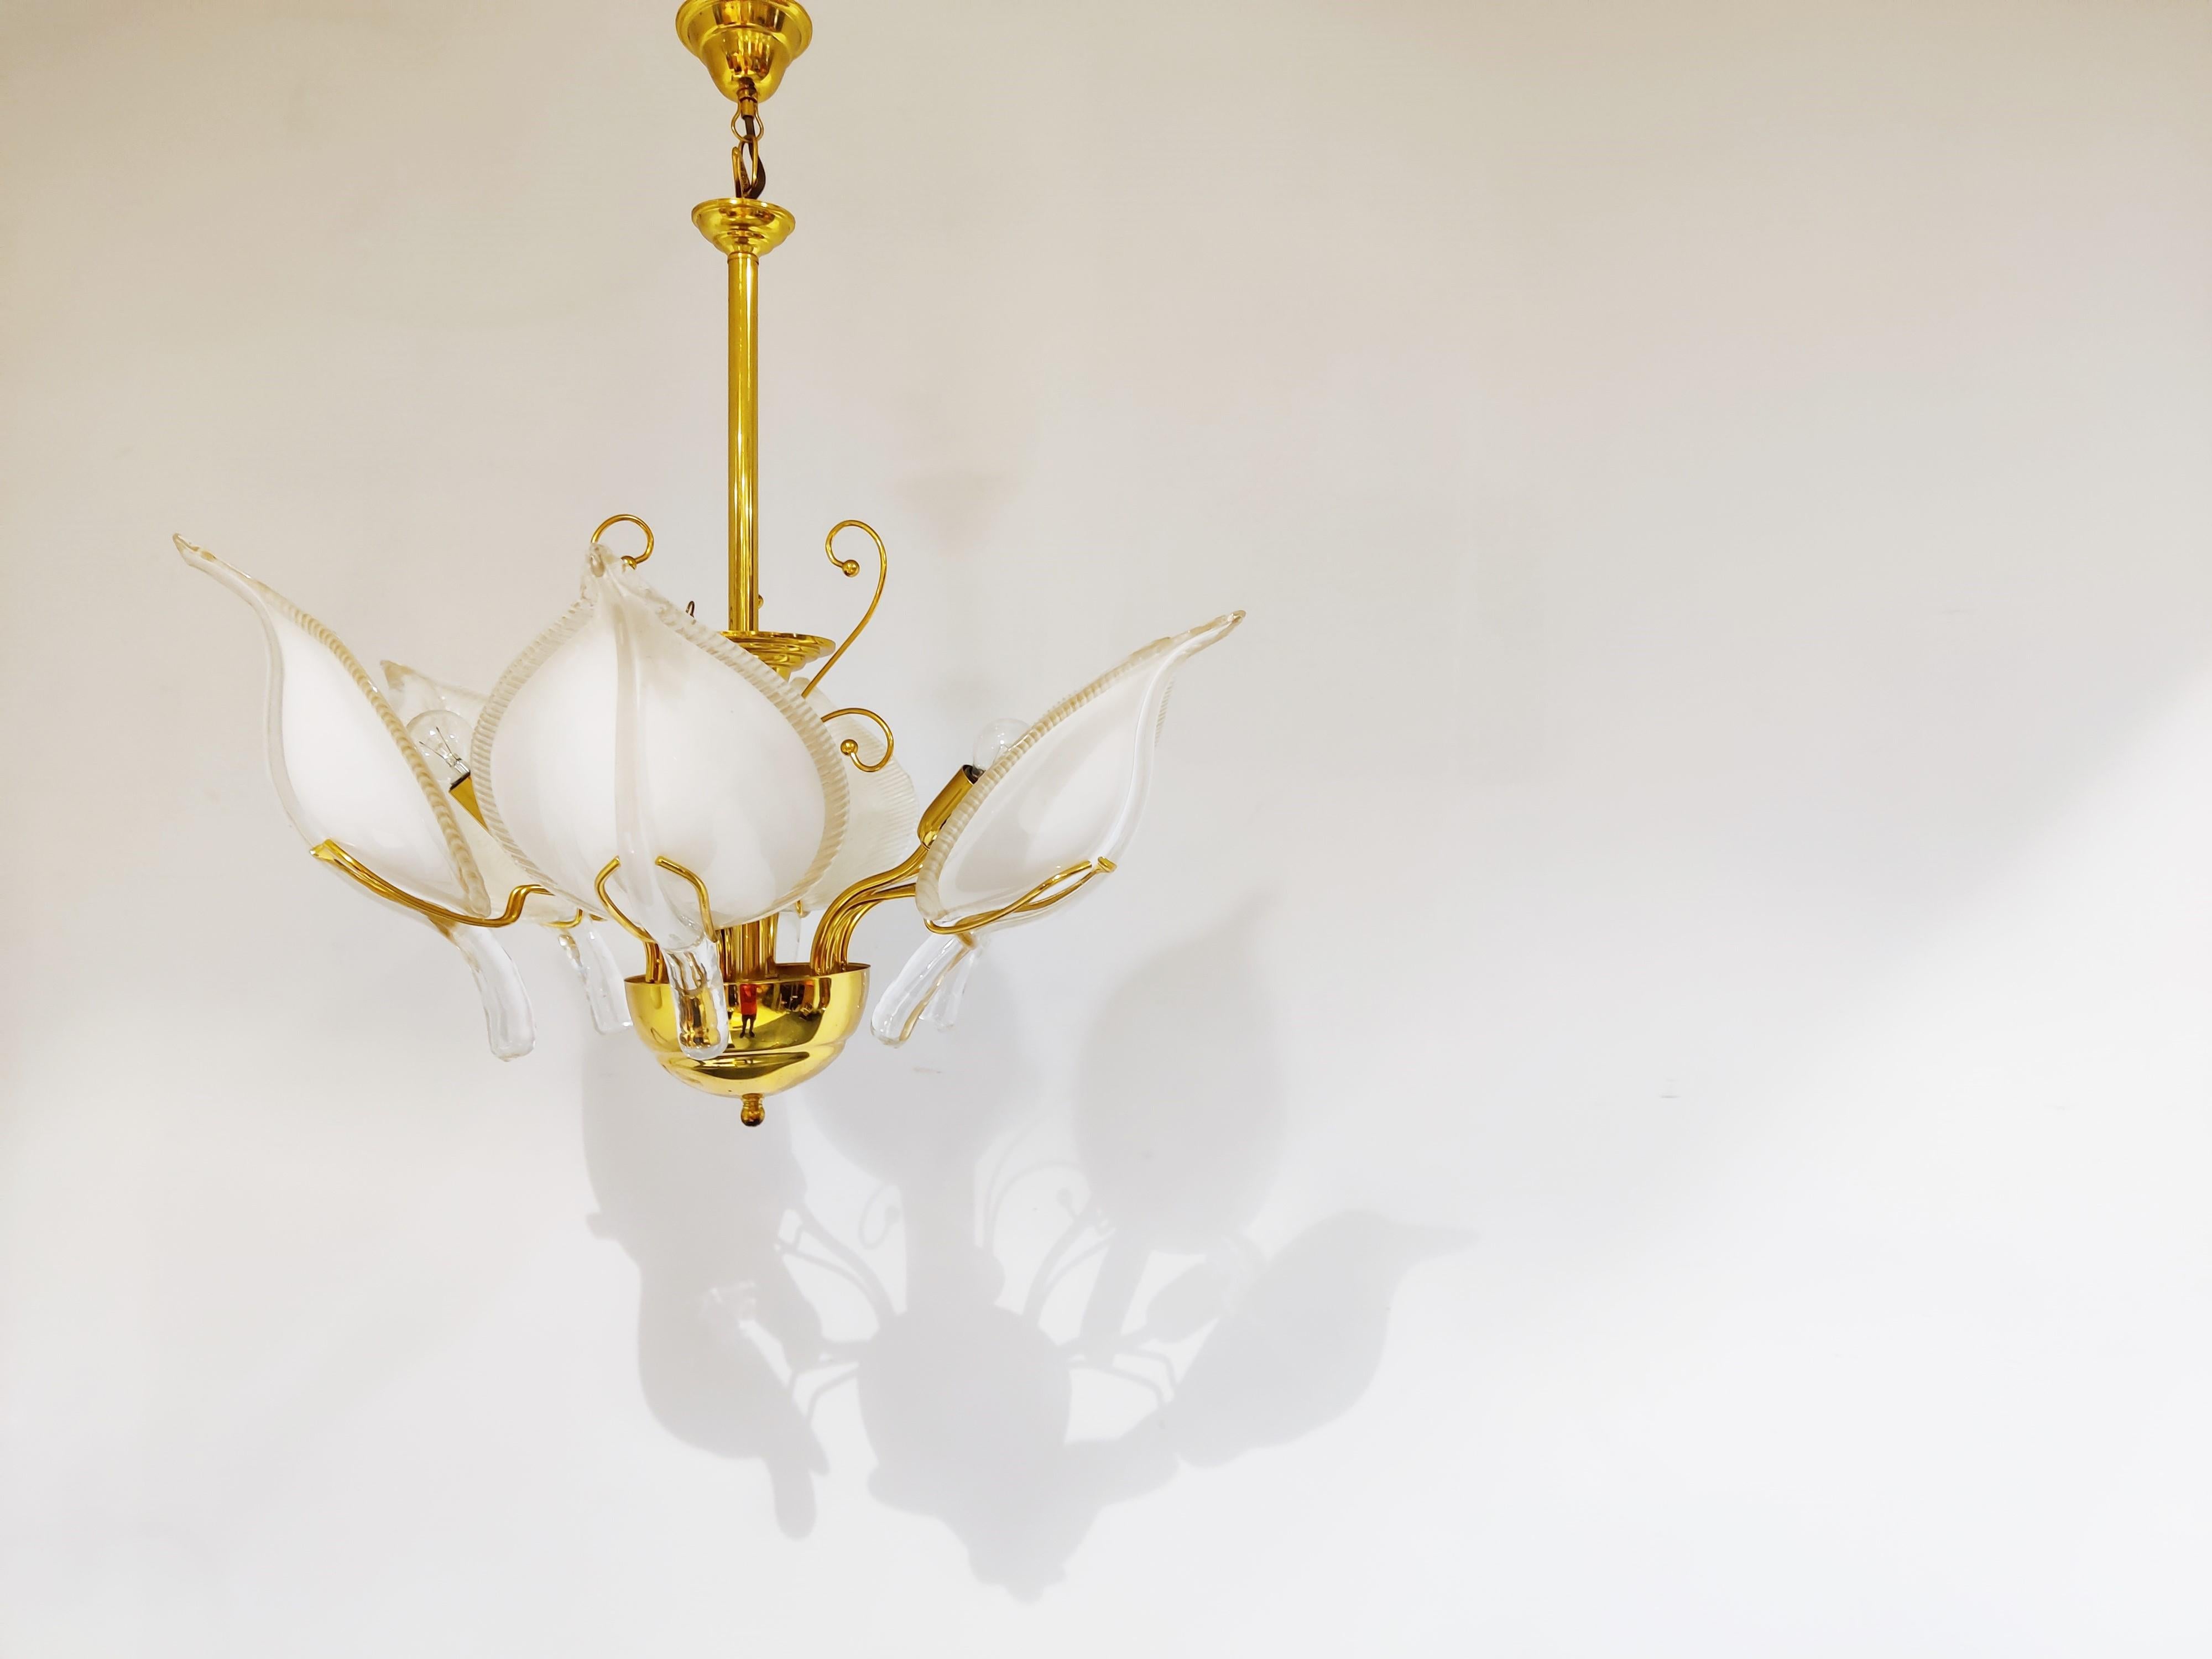 Staggering hand made murano glass leaf chandelier with a brass frame by Barovier & Toso.

Nicely finished leaf shaped glasses.

The chandelier has been tested and works with regular E14 light bulbs.

1970s - Italy

Measures: Height: